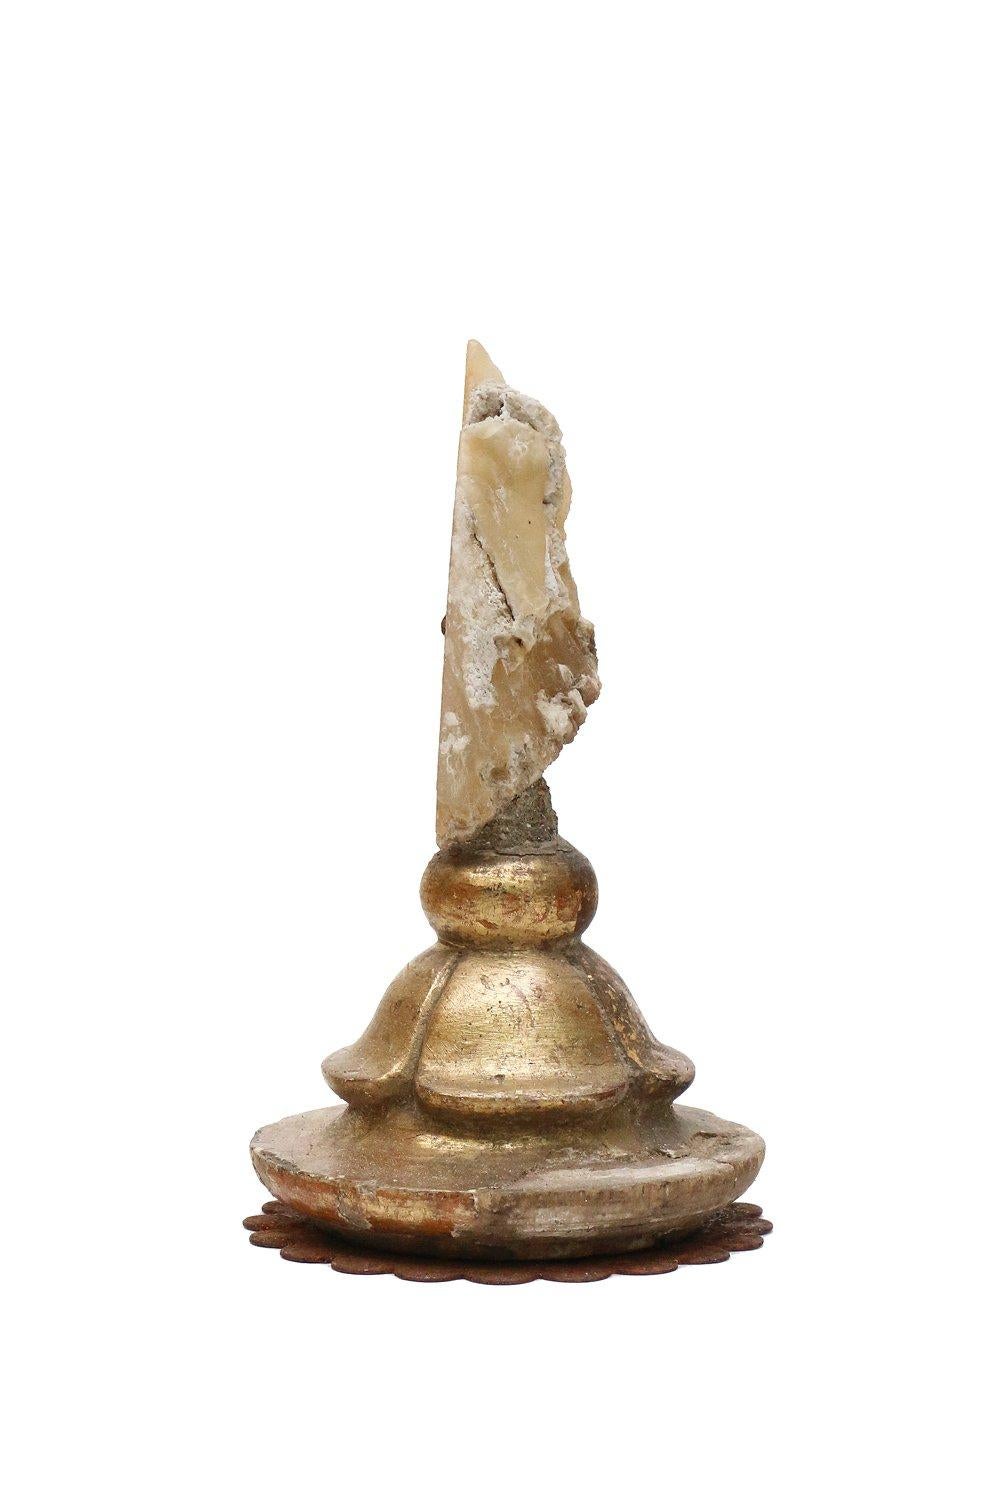 Rococo 18th Century Italian Candlestick Top with Polished Agate Coral & Baroque Pearl